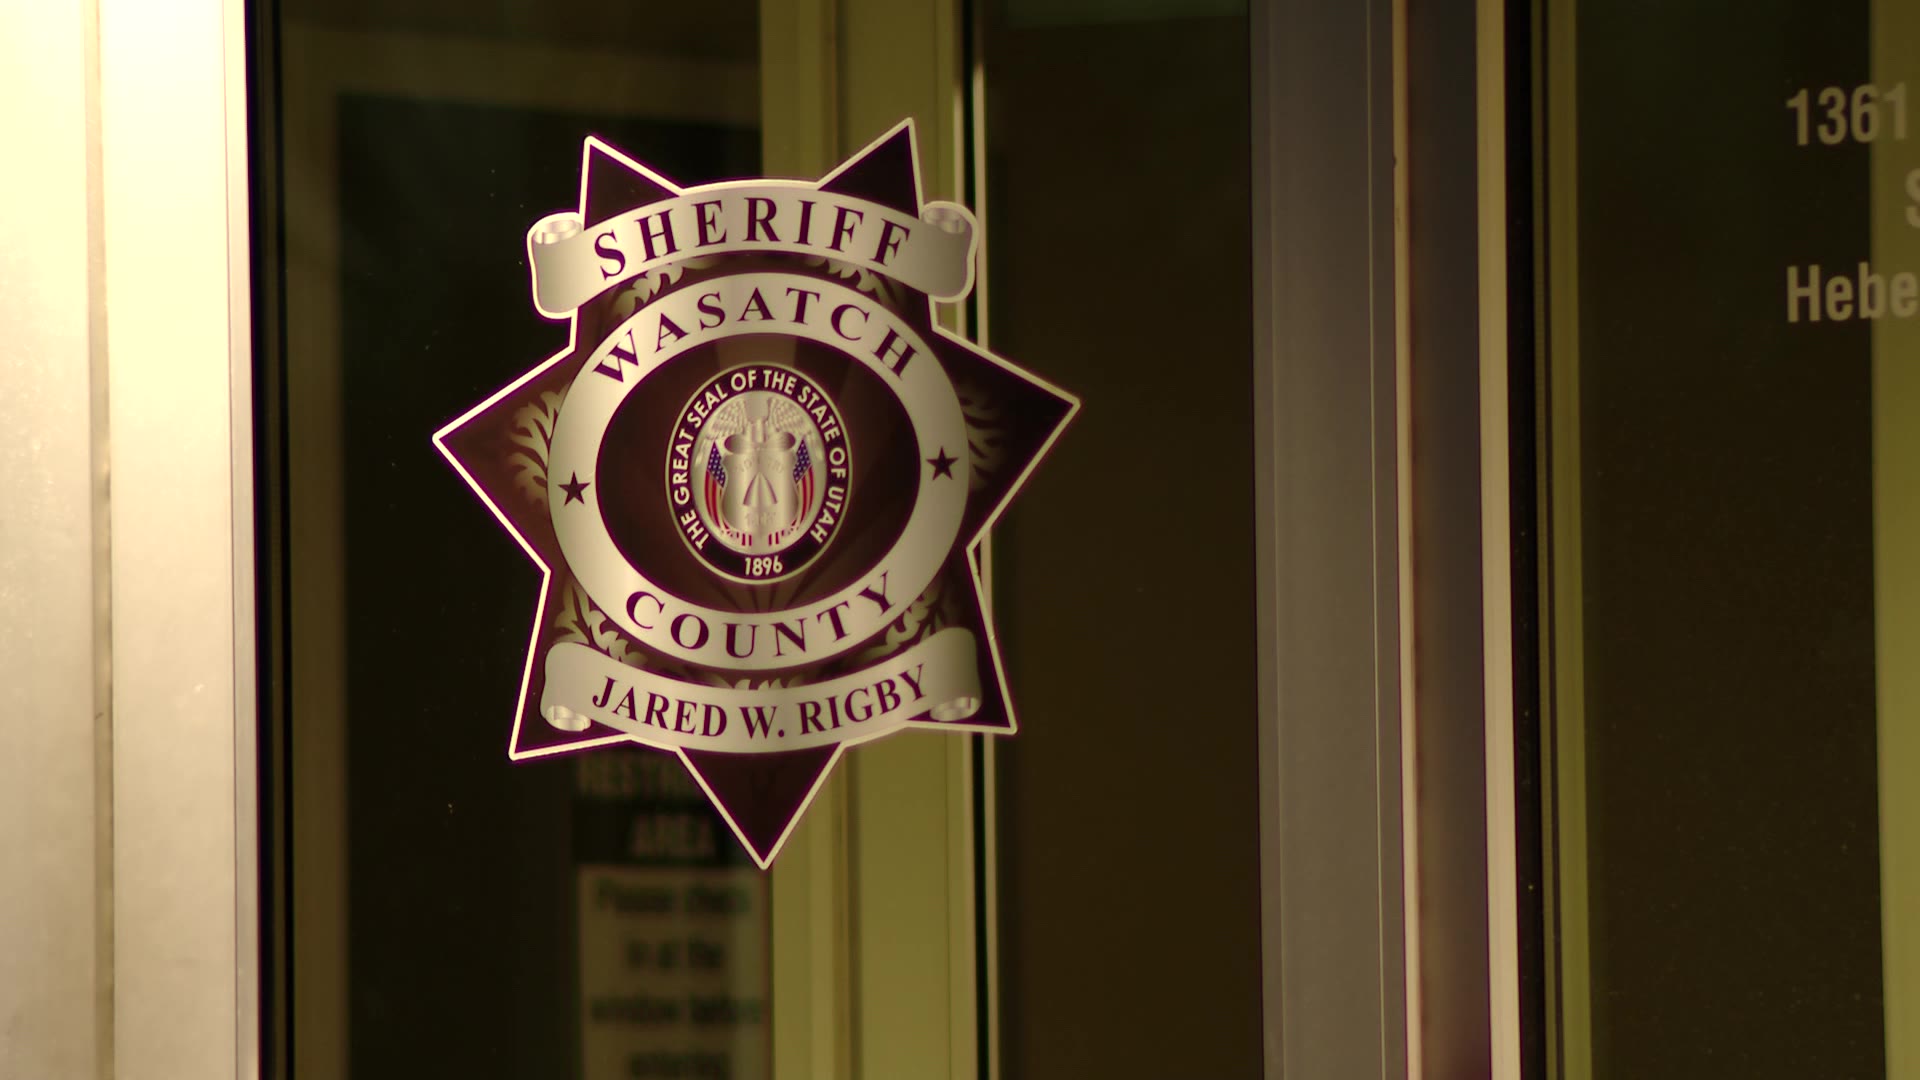 The Wasatch County Sherriff's logo on the doors of the offices in Heber....